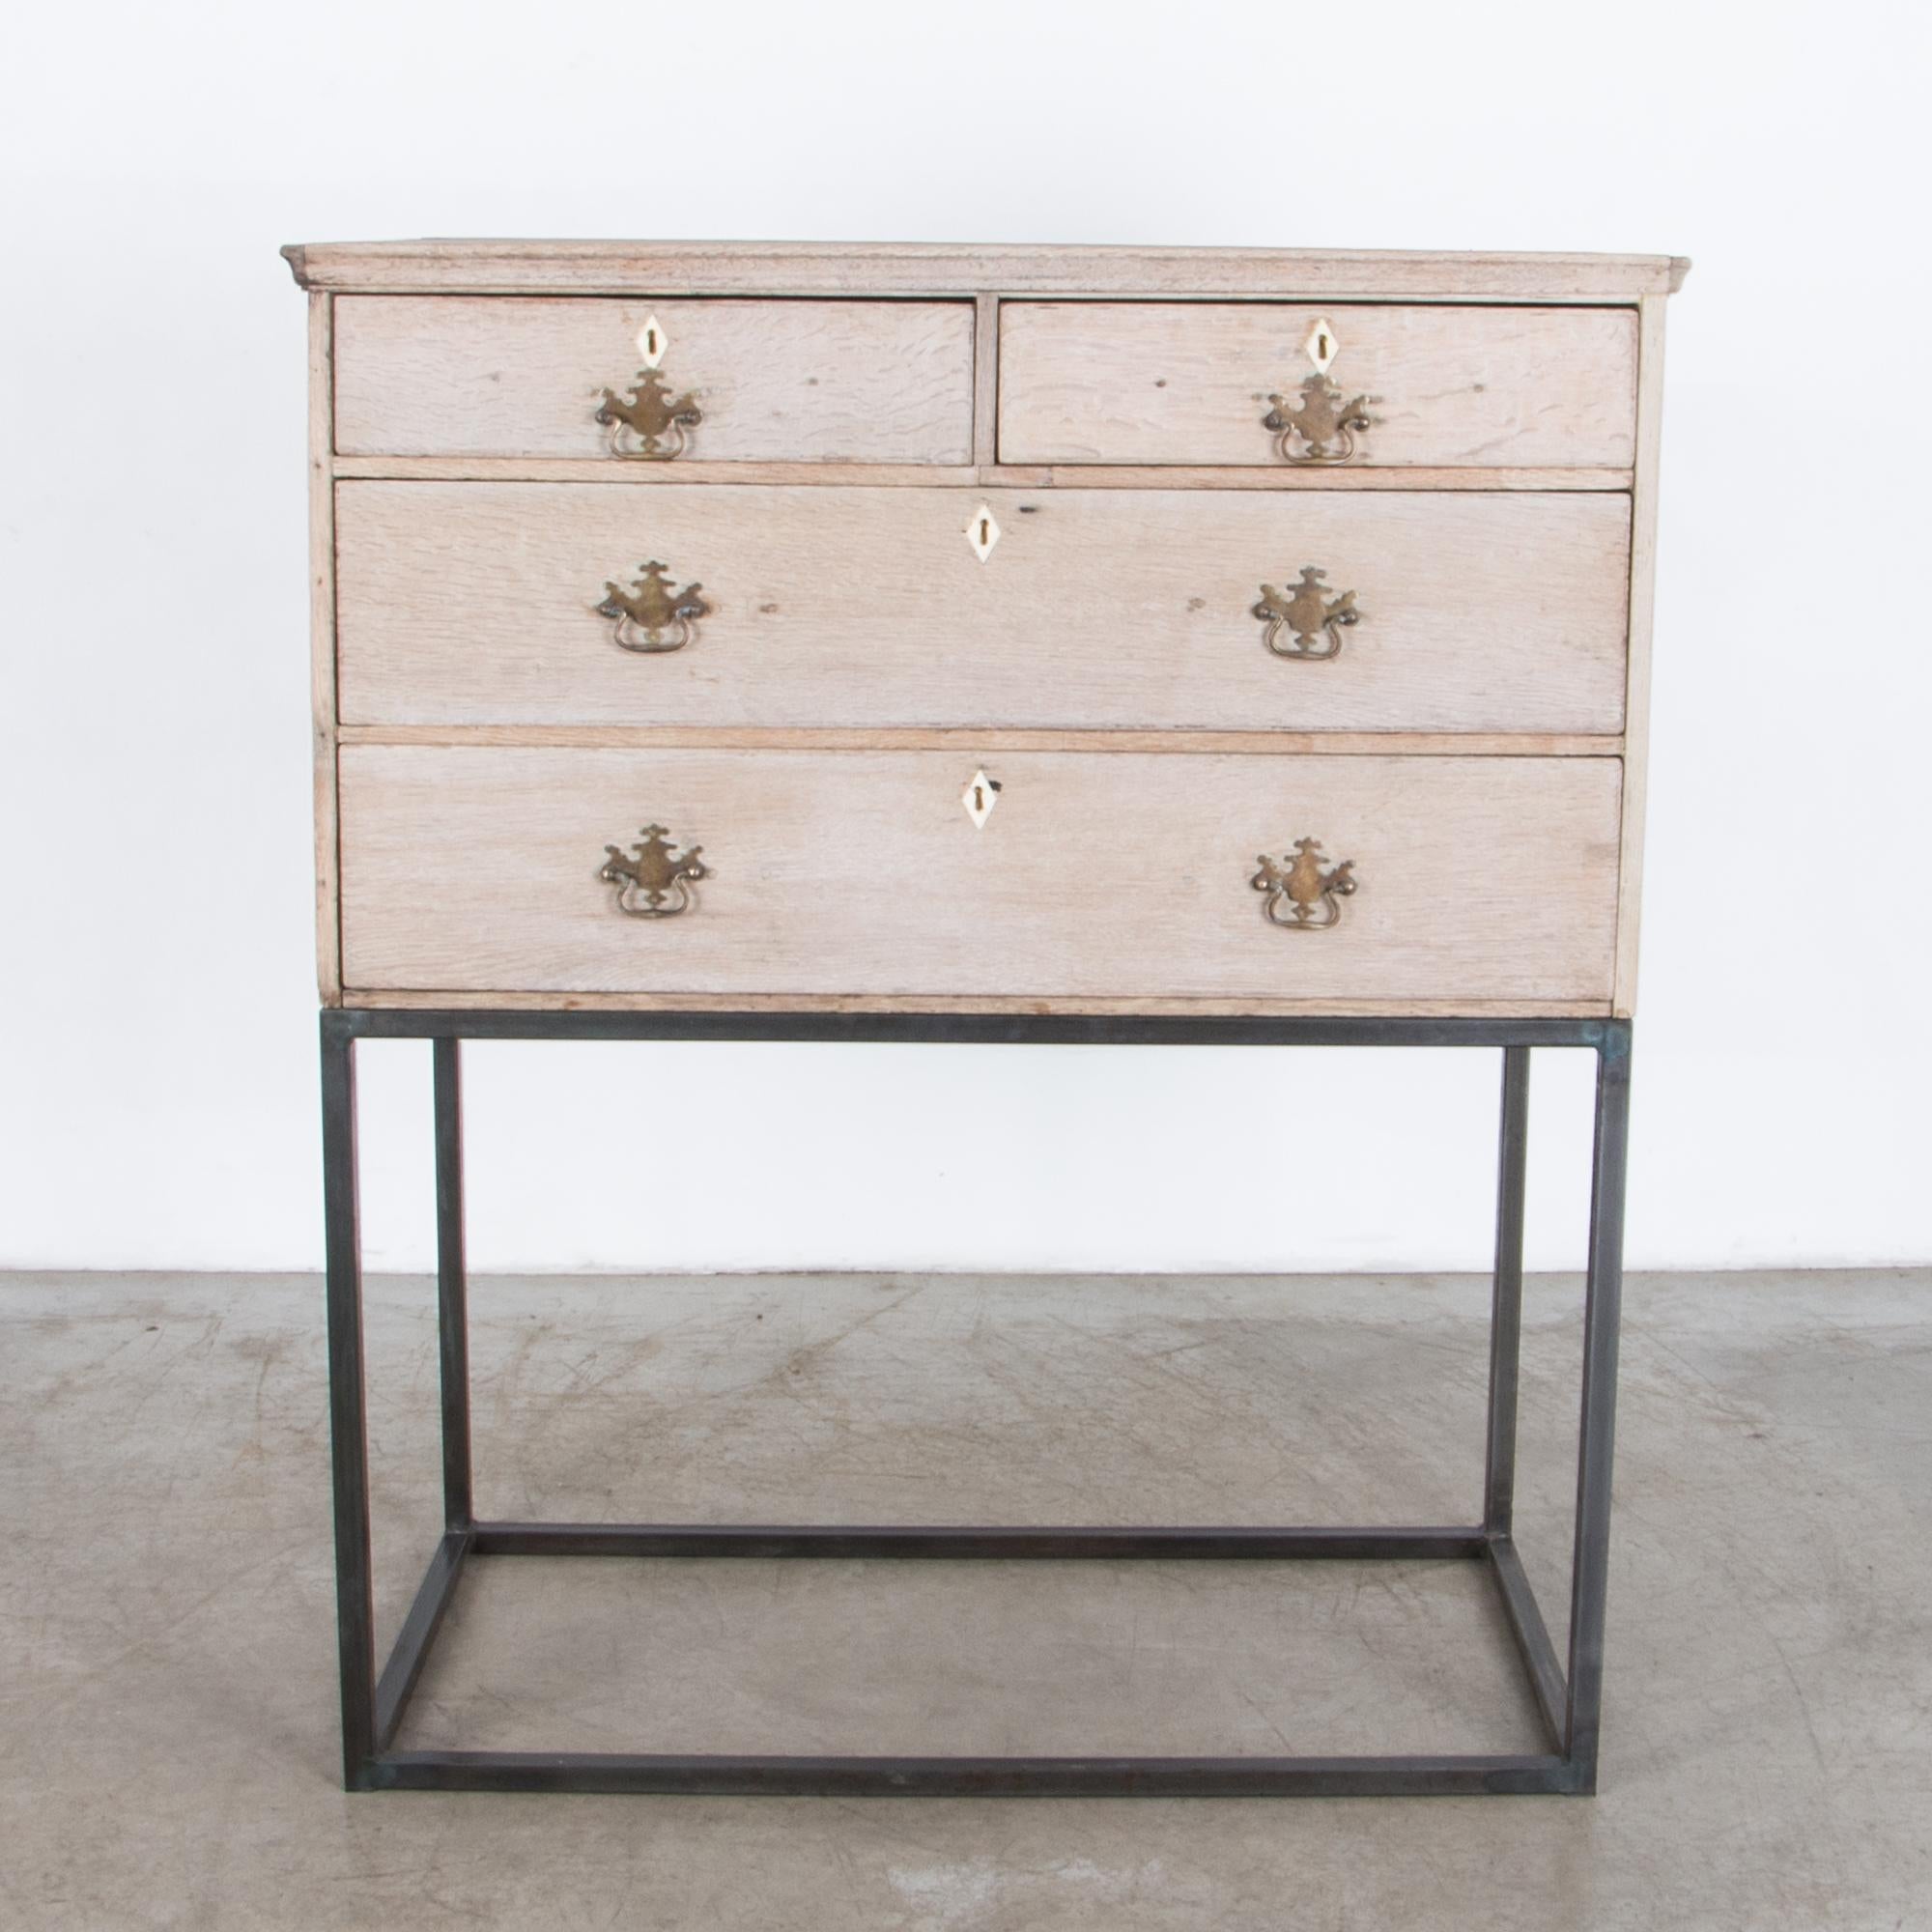 From The United Kingdom circa 1880, a four drawer chest with refined and simple shape, rests on a minimal steel base. Contrast of texture and color enhances the geometric volume of each element. Subtly refined, with brass hardware and upper moulding.